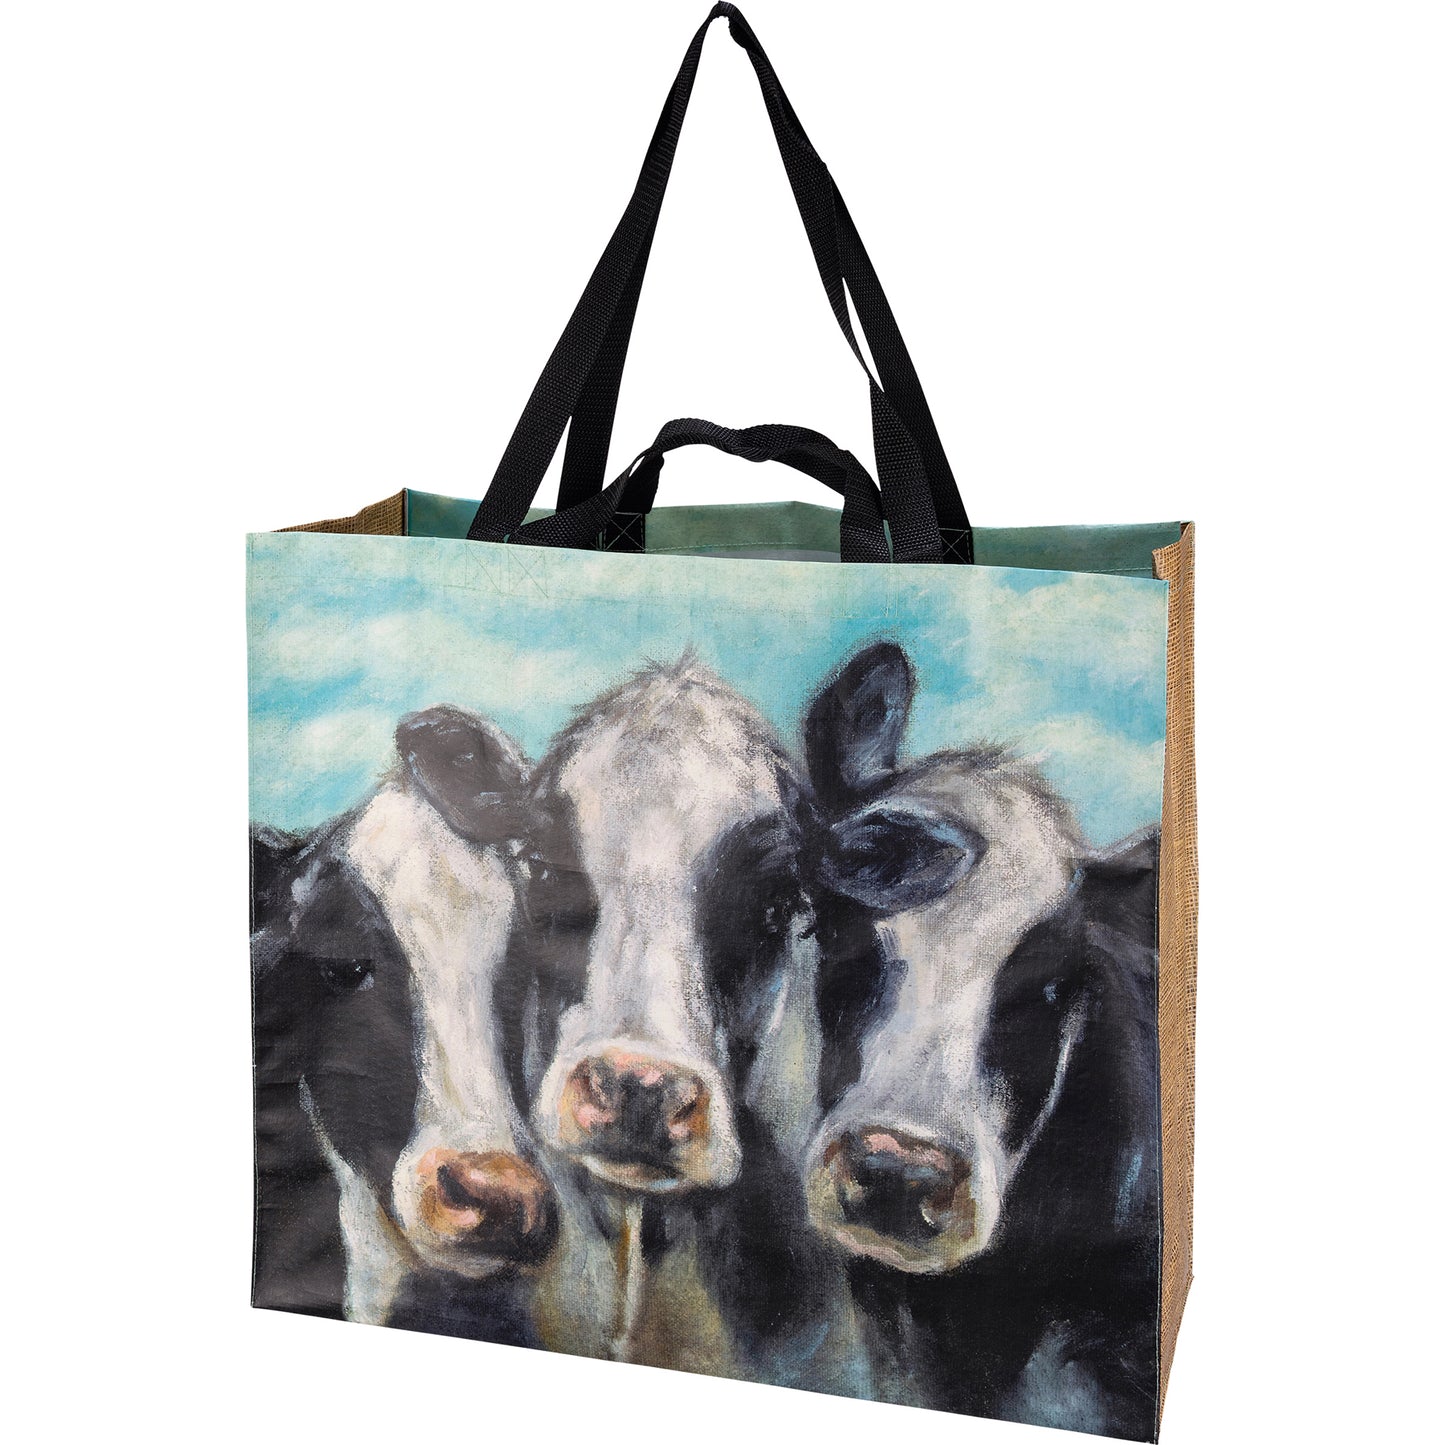 . Primitives by Kathy Cow Shopping Tote